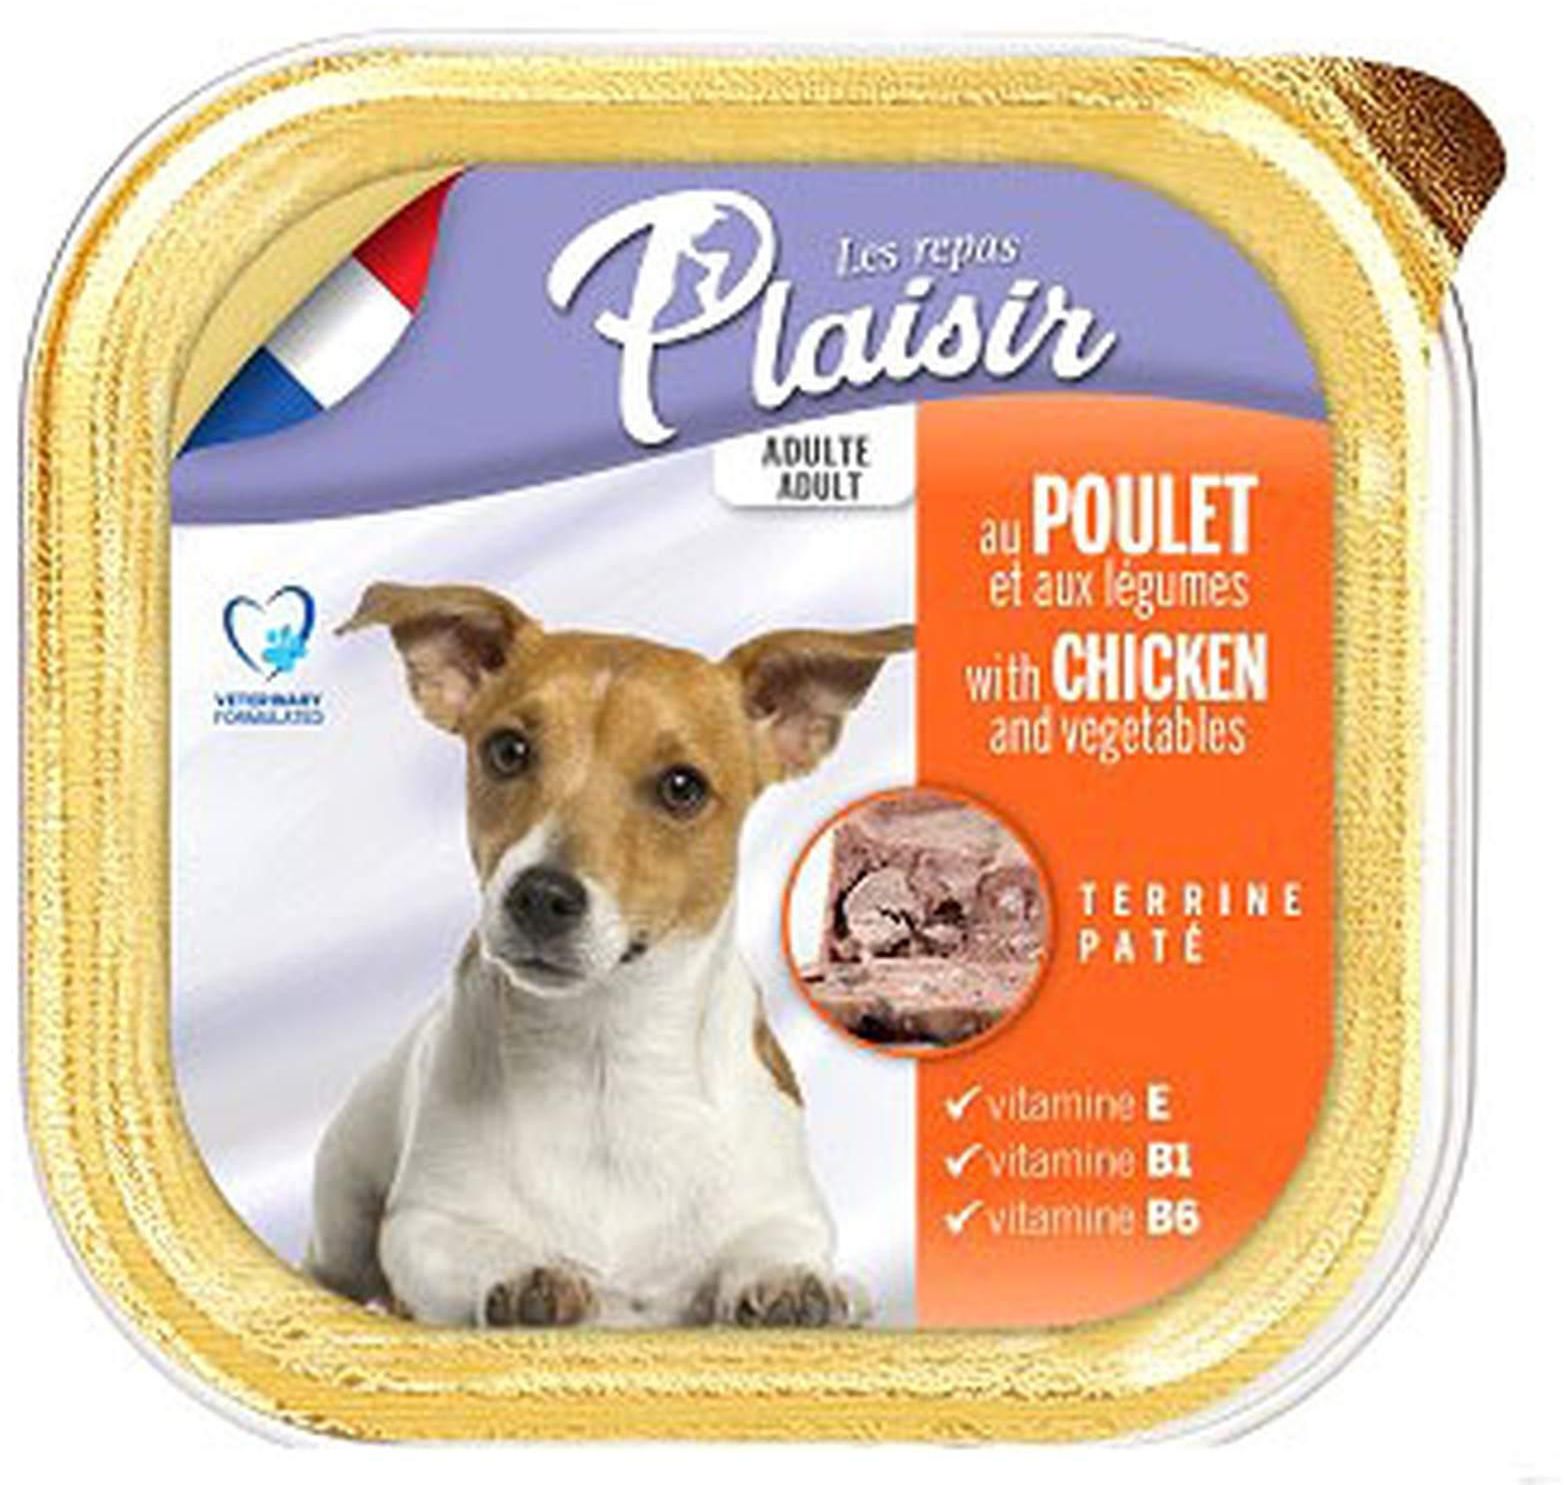 Les Repas Plaisir Pate With Chicken And Vegetable Dog Food 300g